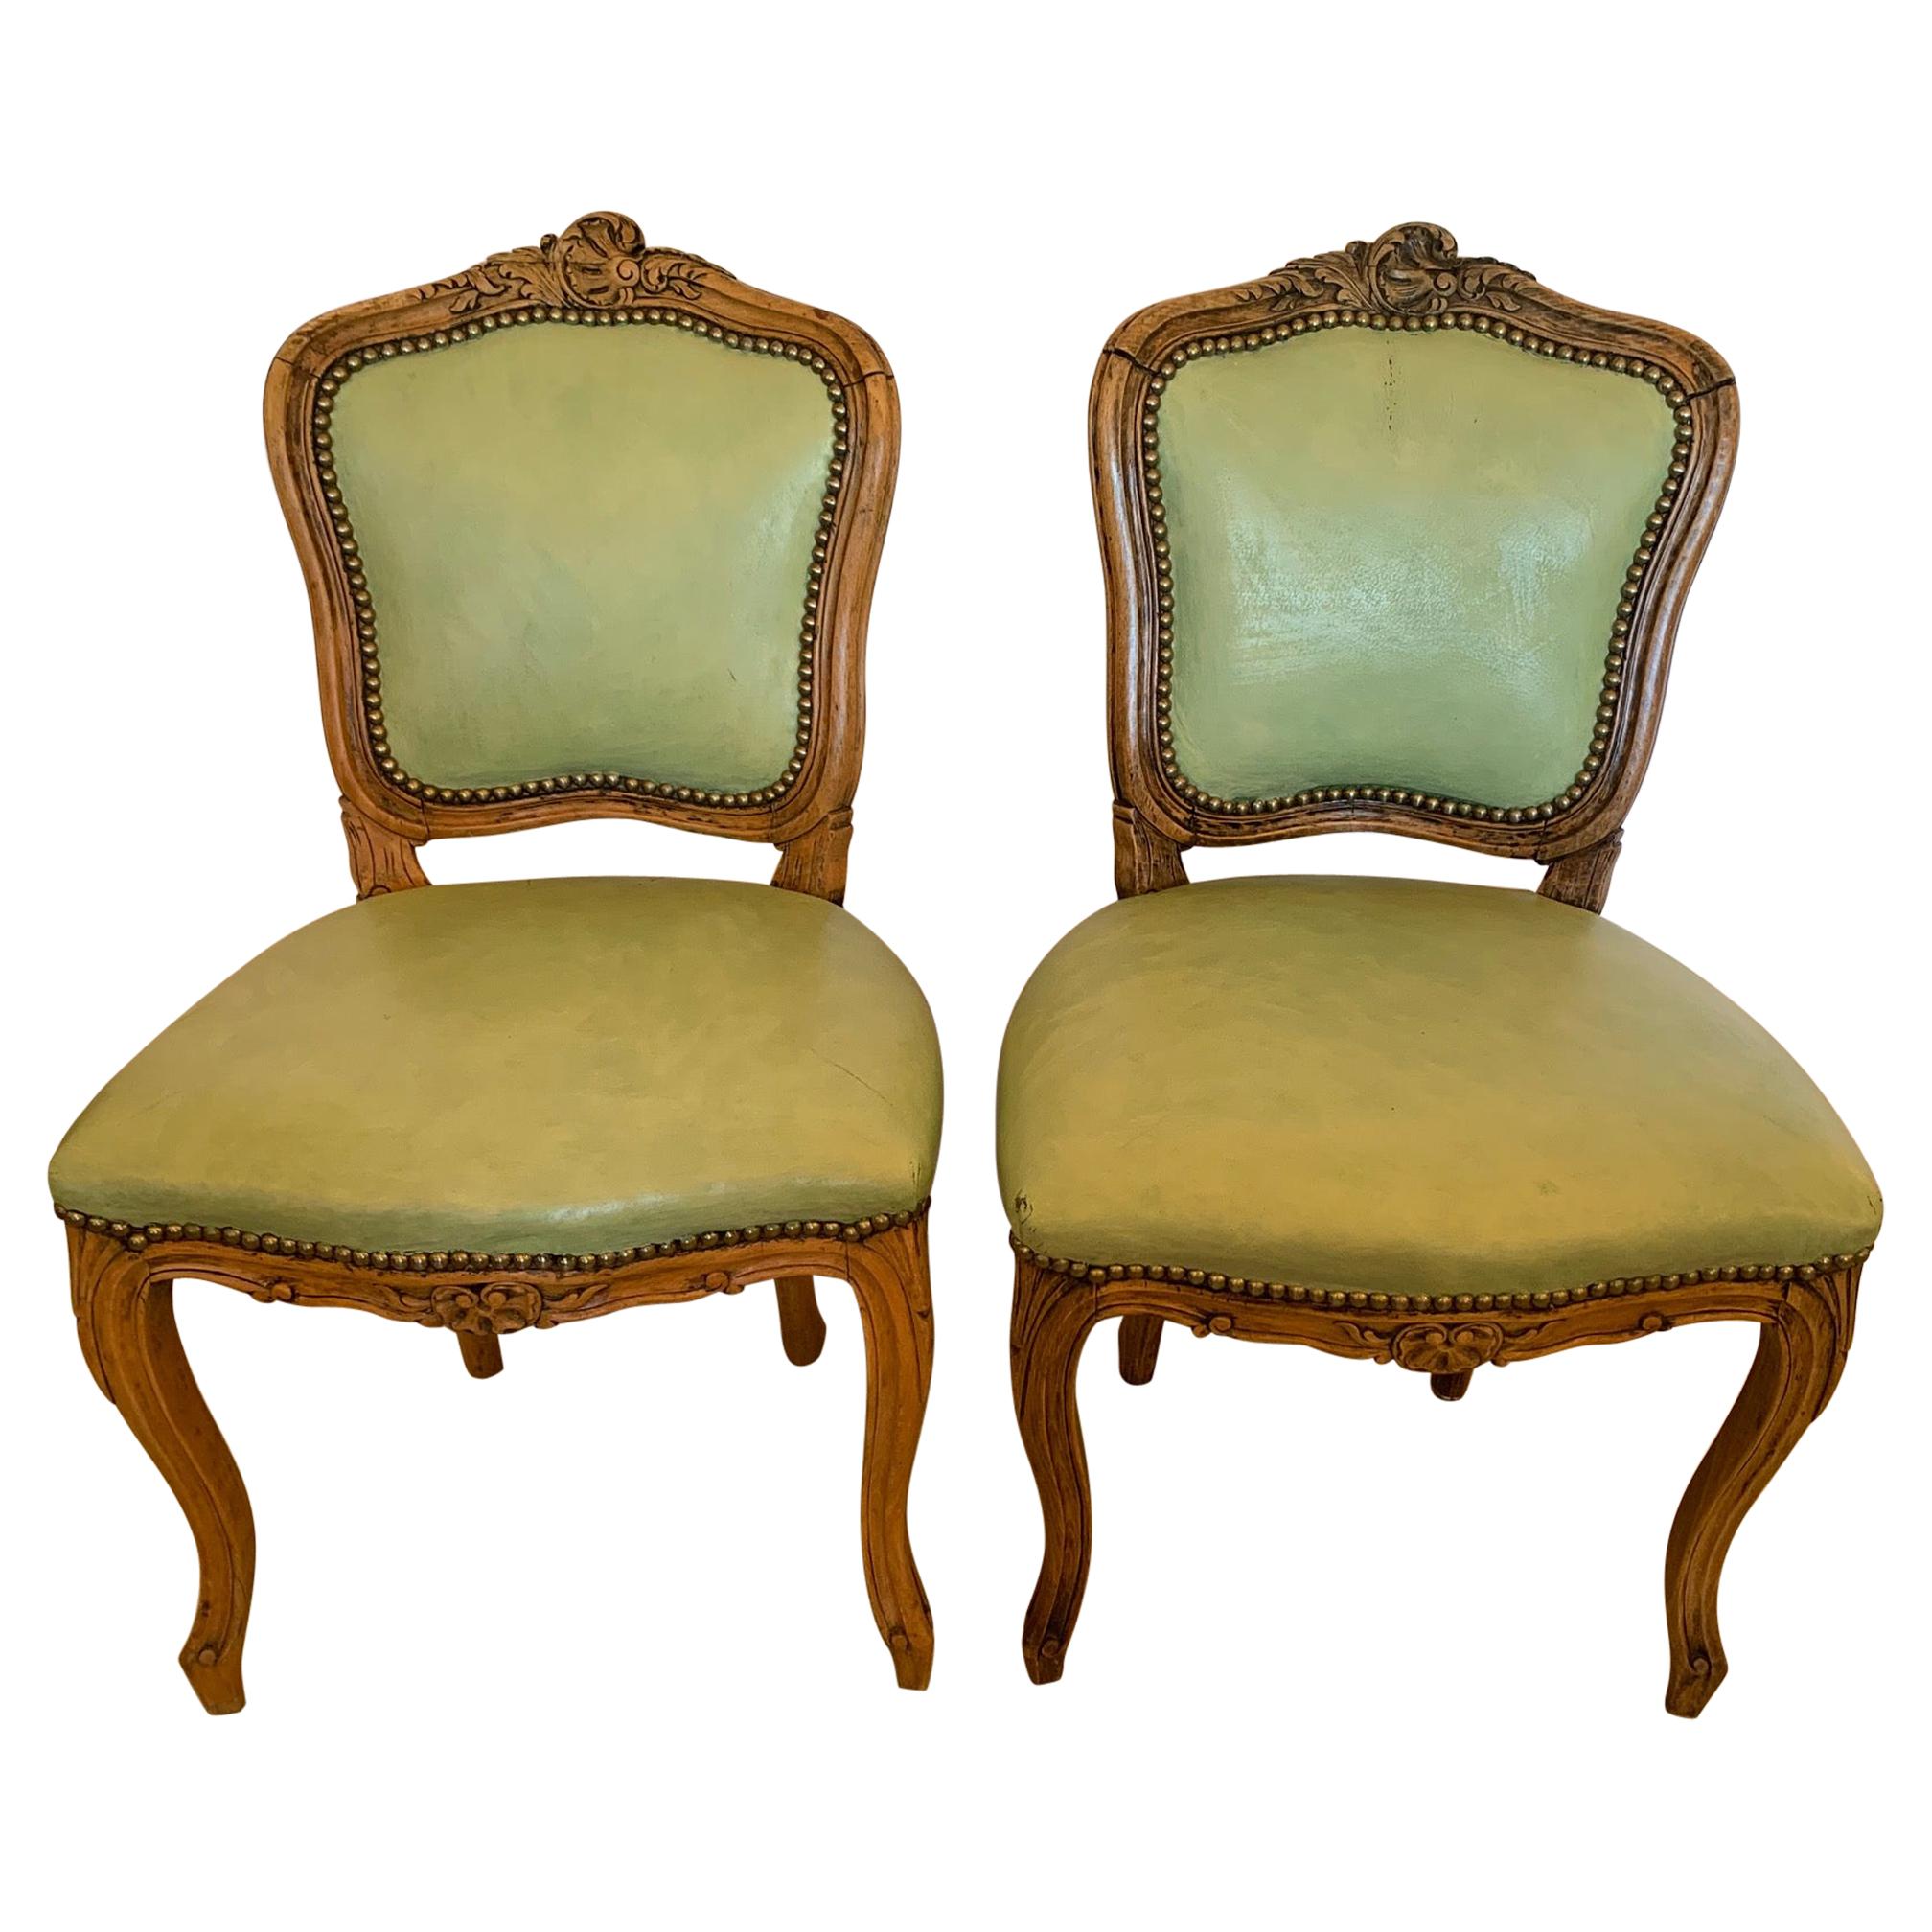 Darling Pair of French Antique Light Green Leather Carved Walnut Side Chairs